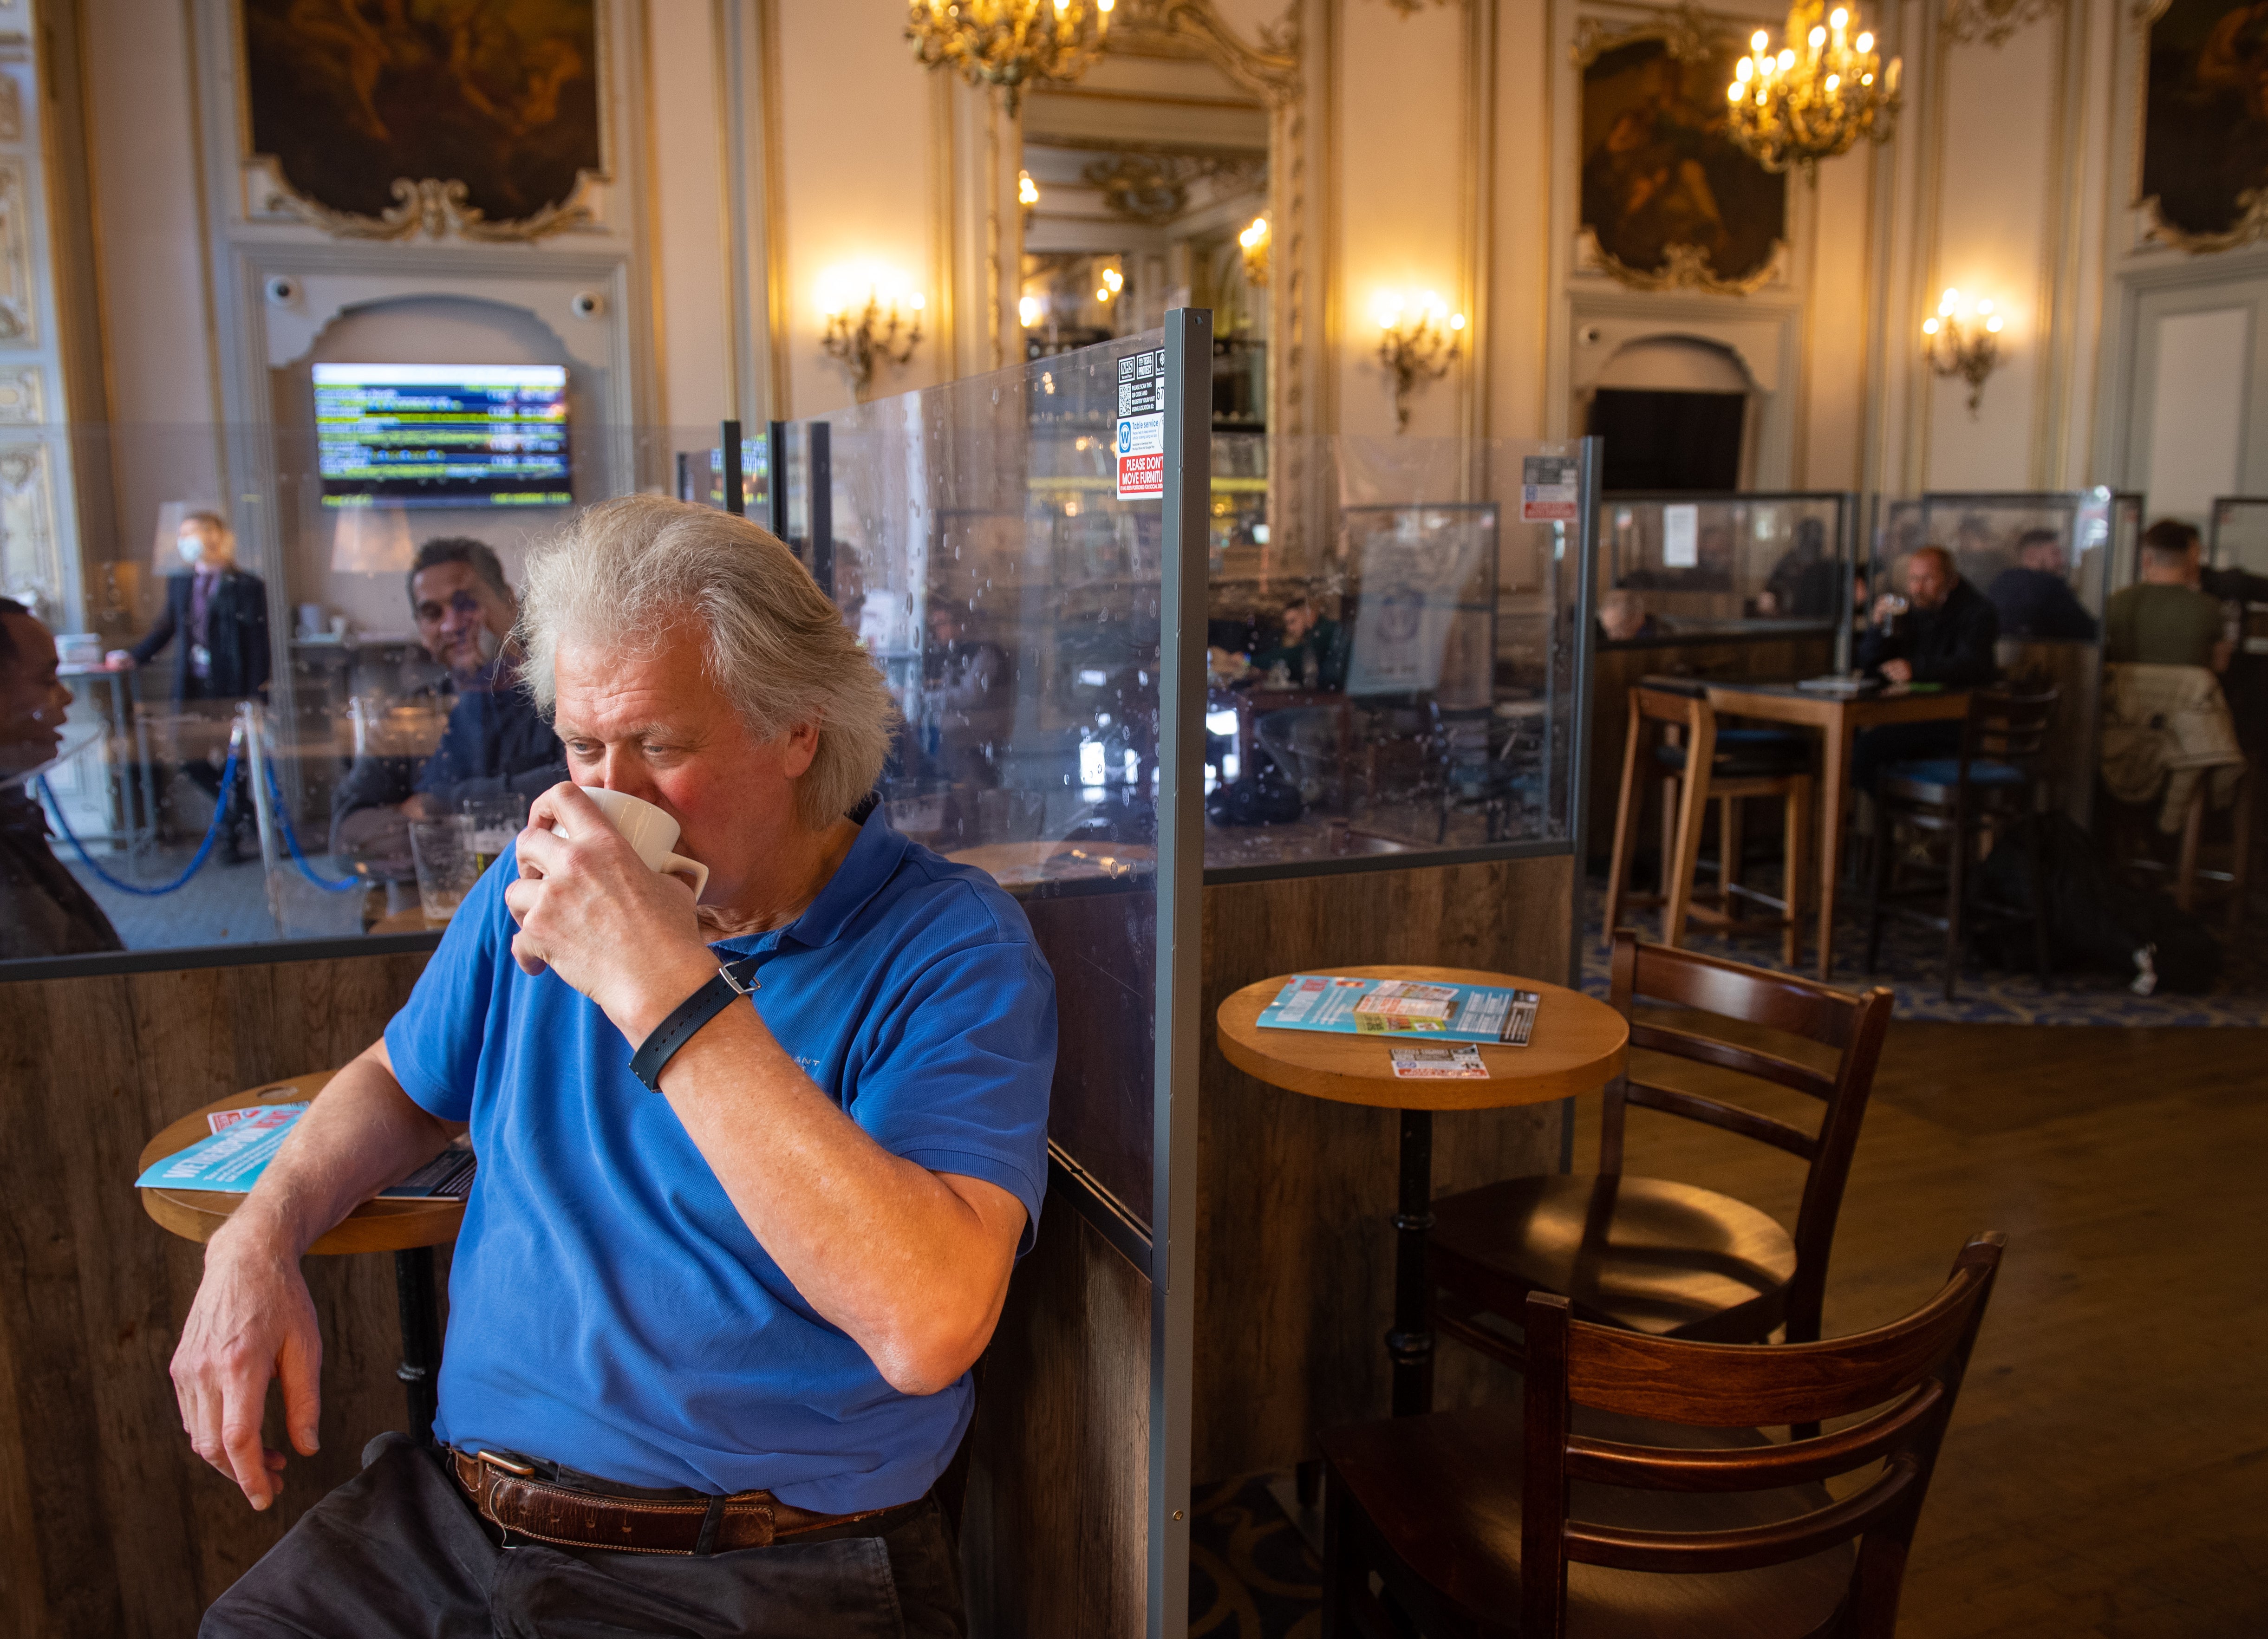 Wetherspoons founder and chairman Tim Martin said the pub group has seen cost increases in its supply chain (Dominic Lipinski/PA)